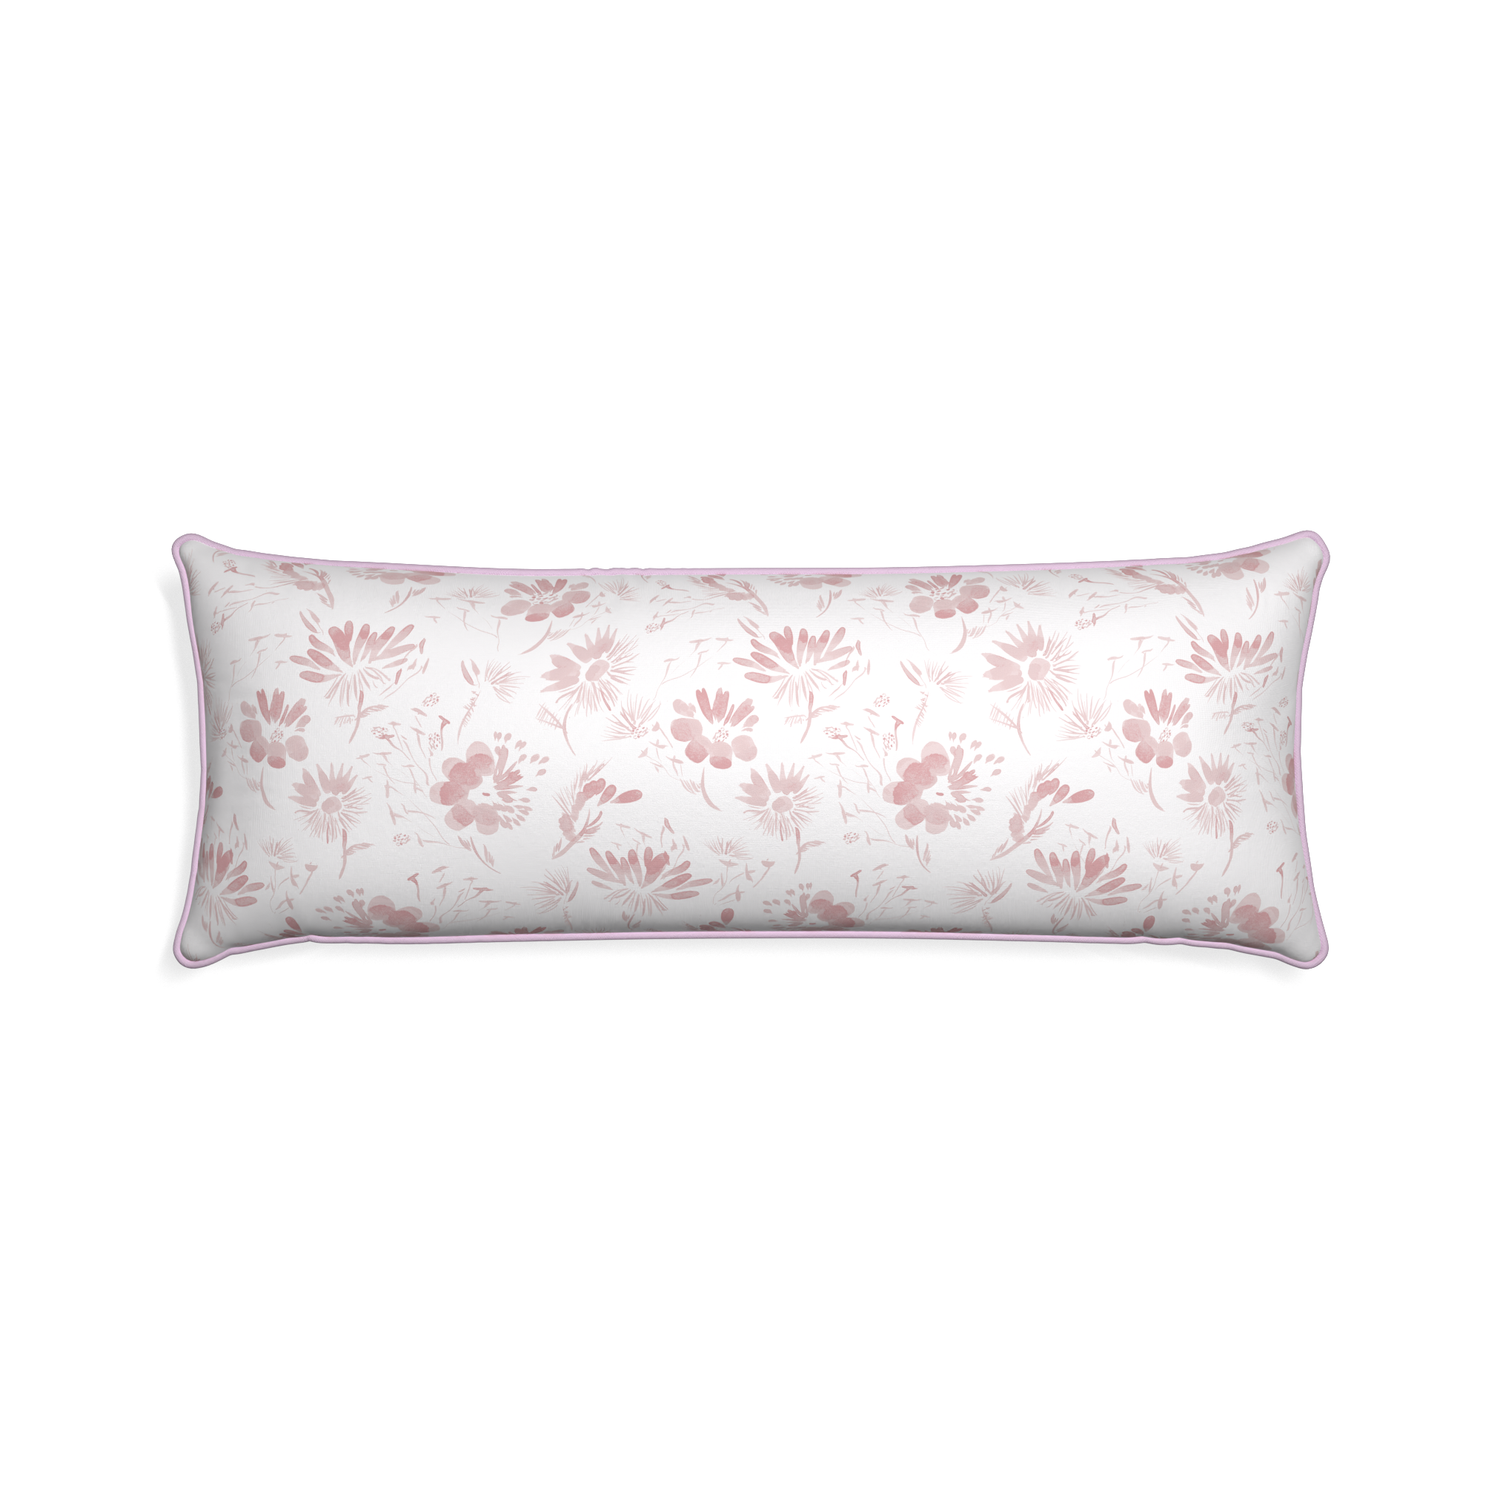 Xl-lumbar blake custom pink floralpillow with l piping on white background